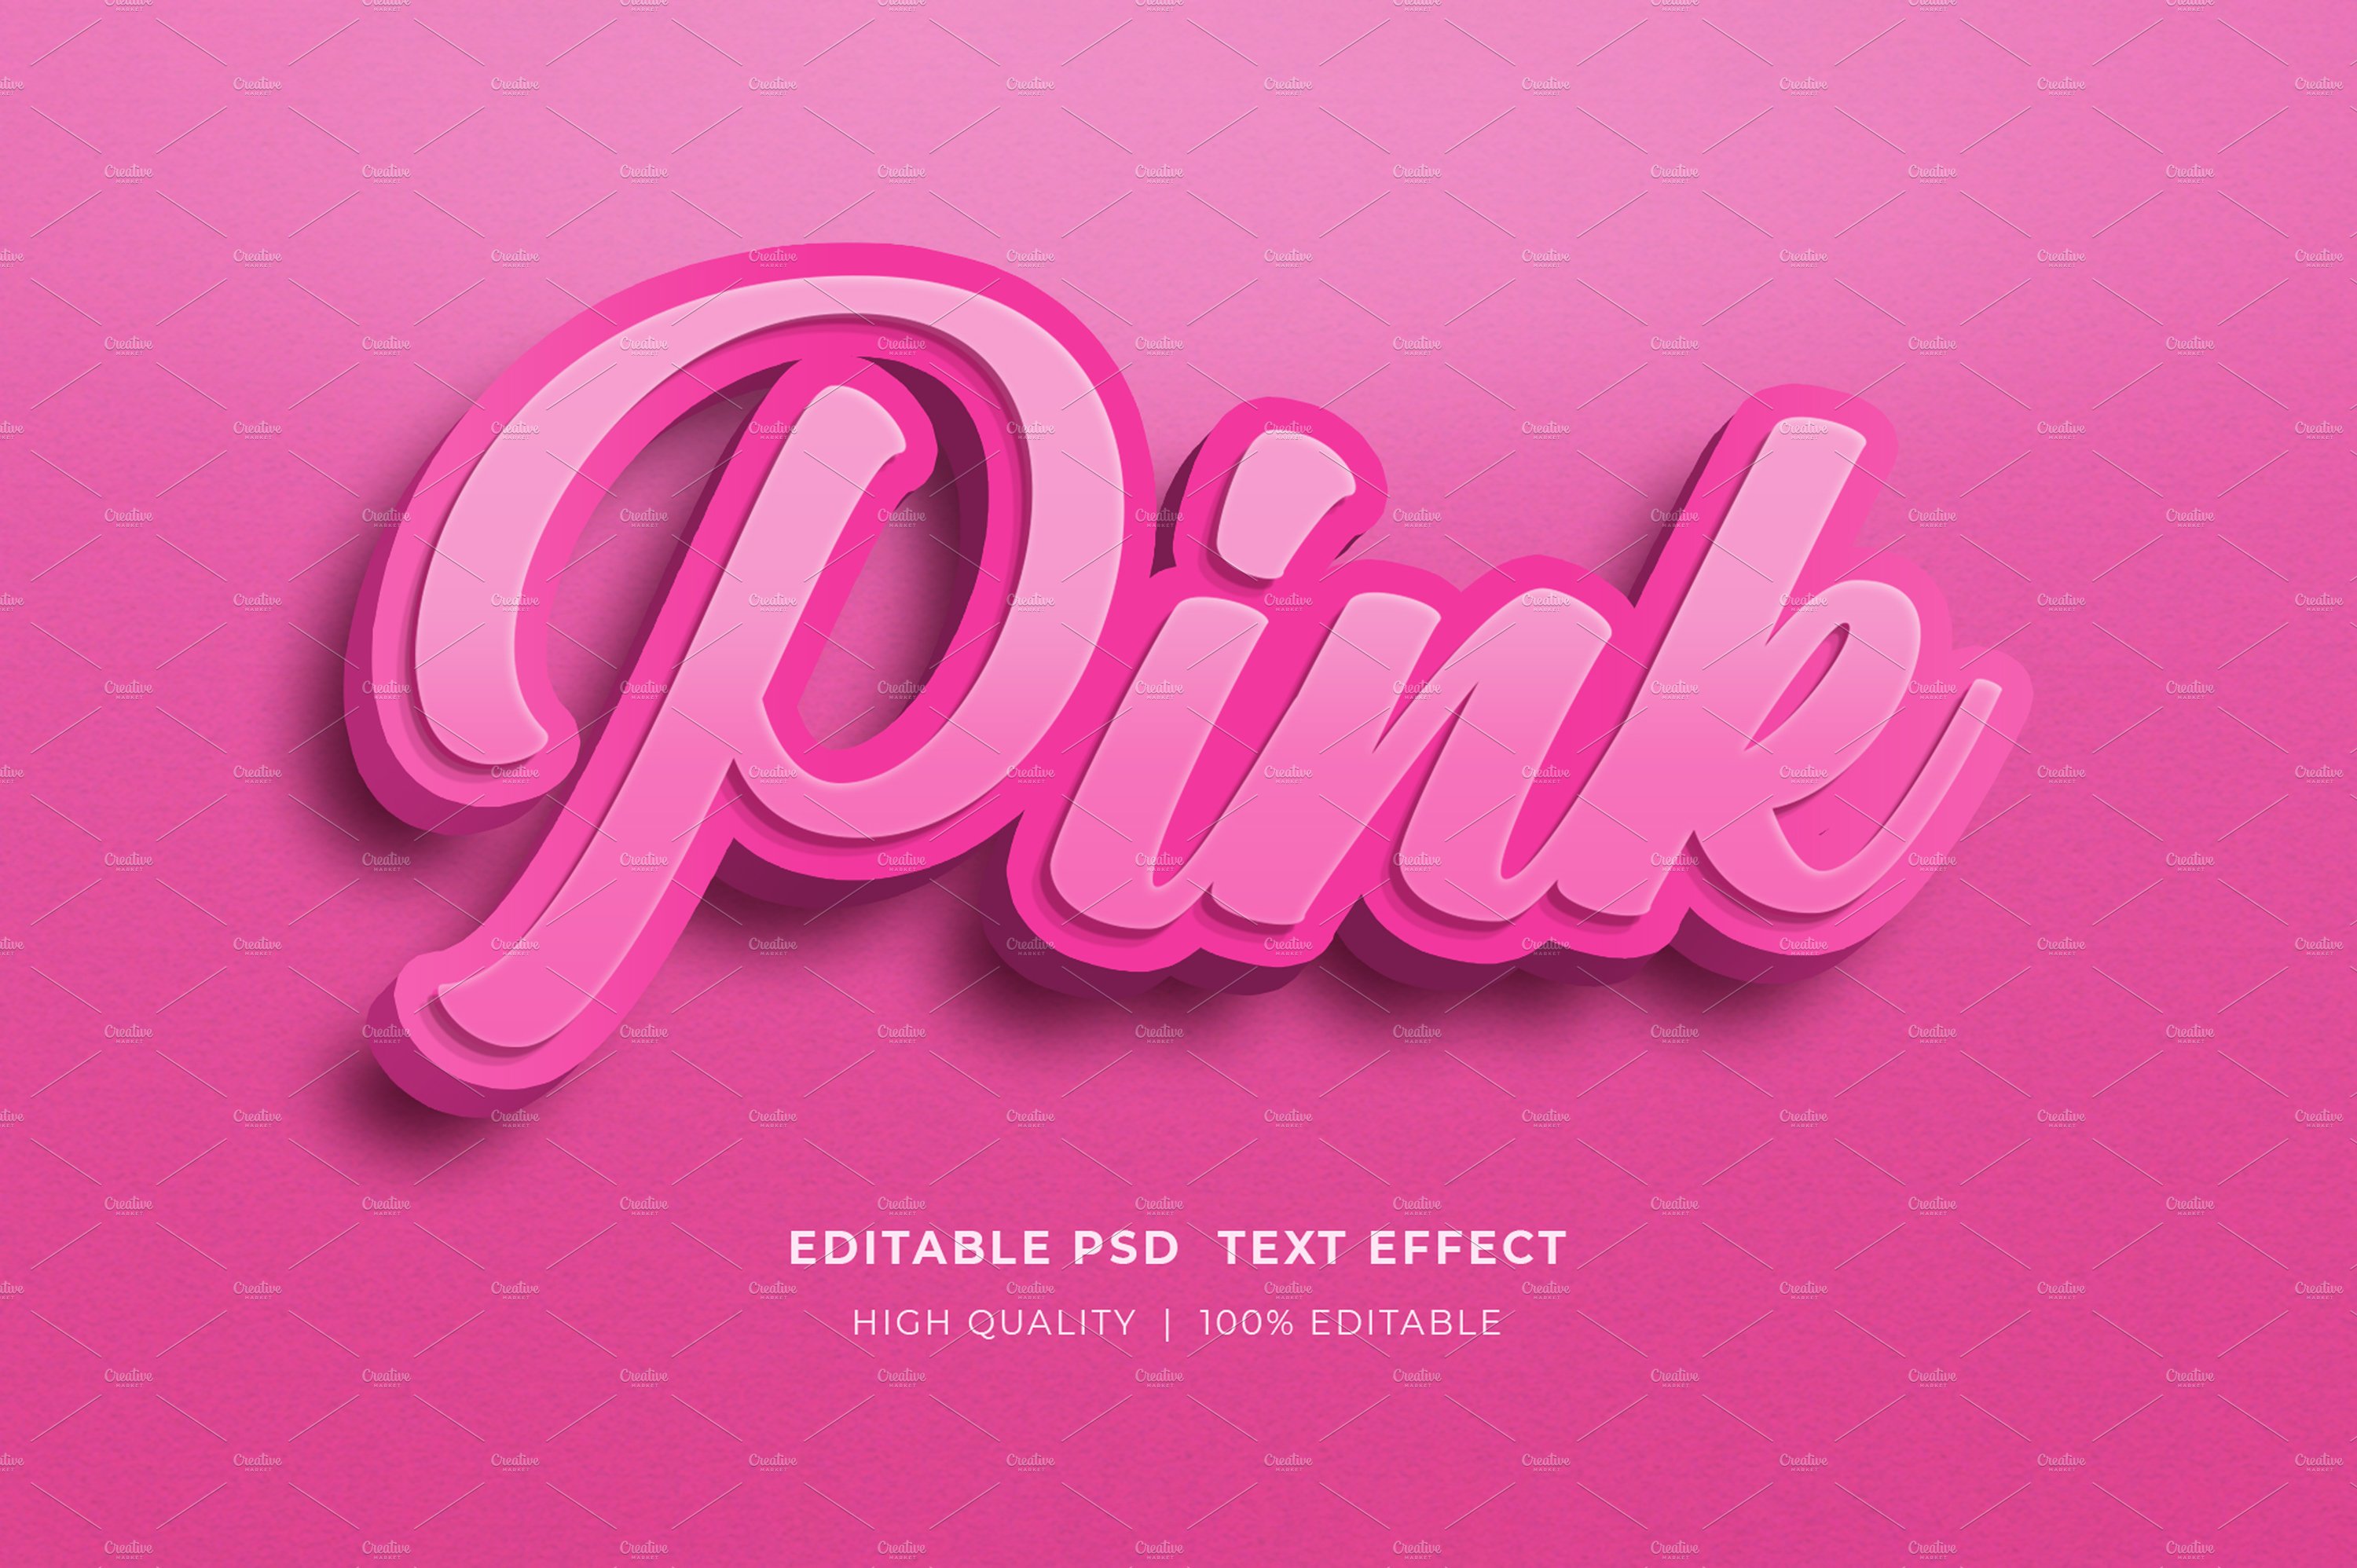 Pink Editable Text Effect Mockupcover image.